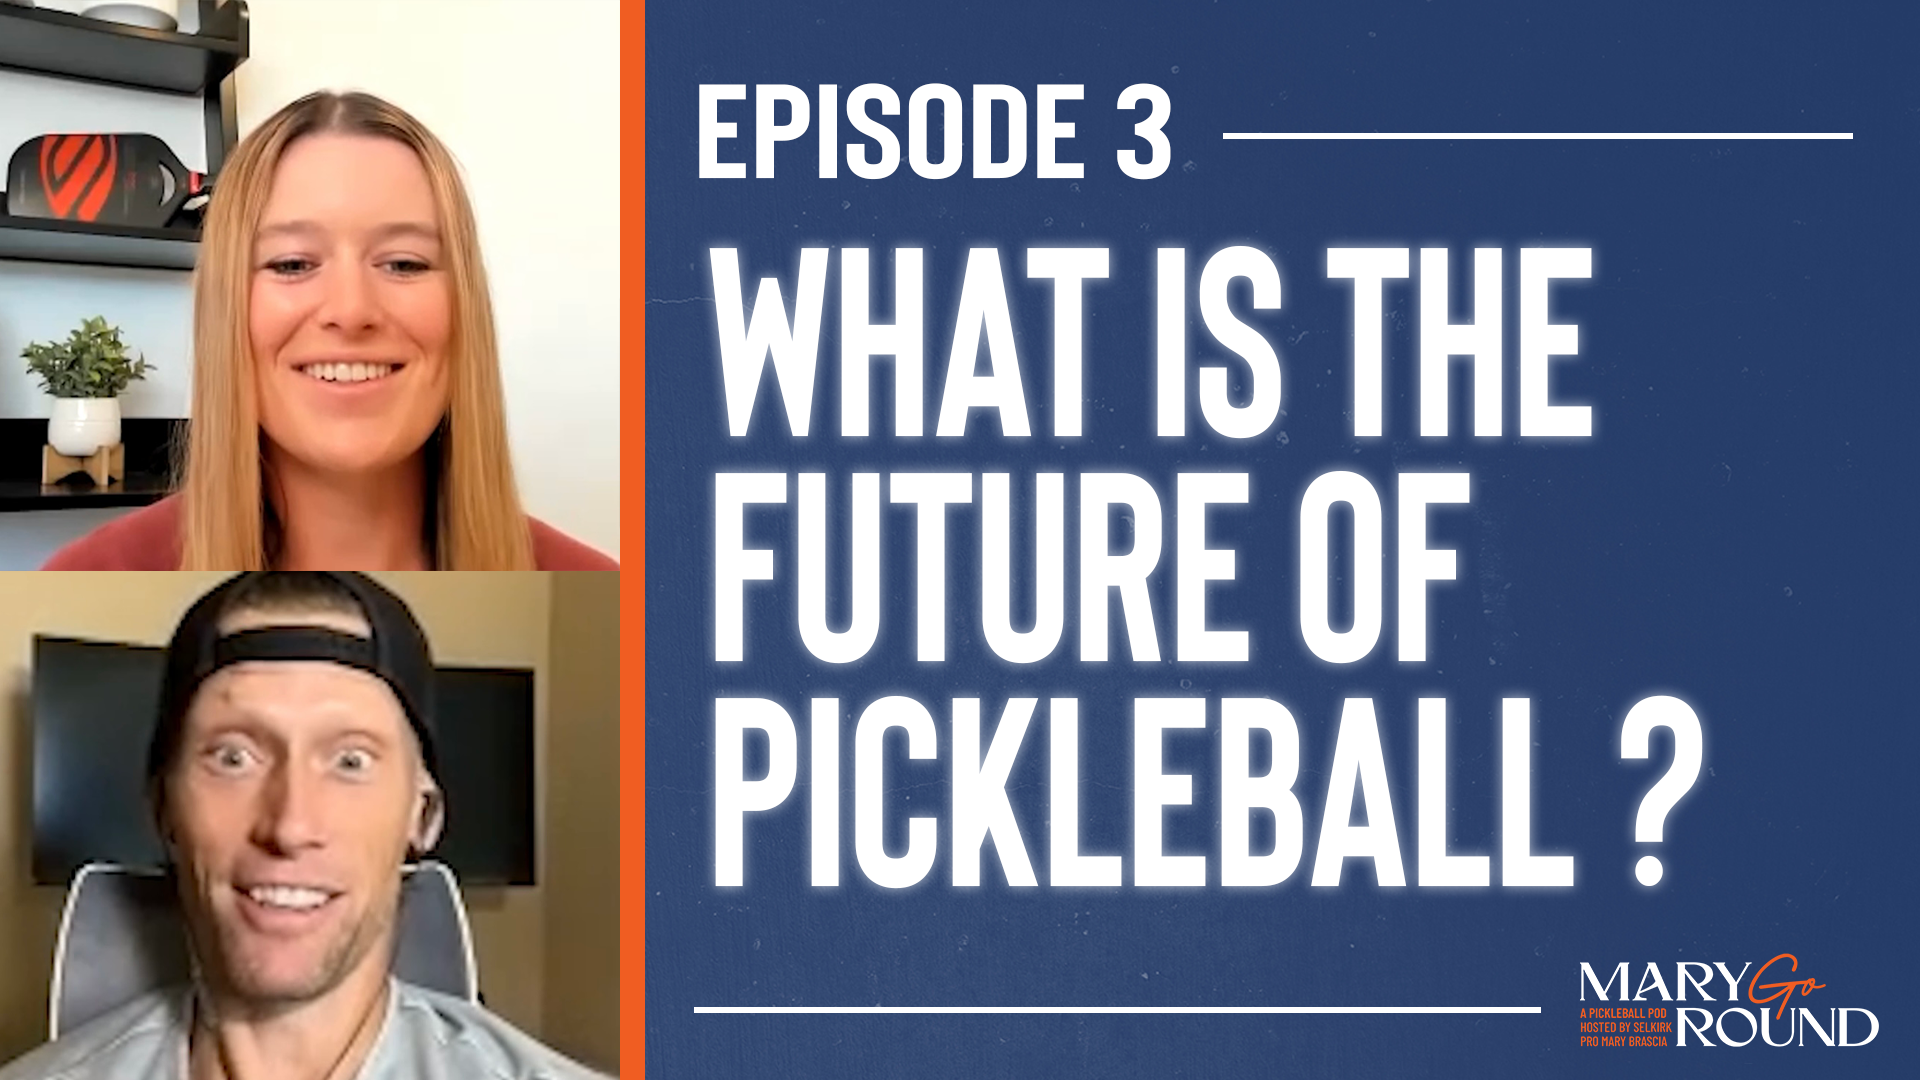 Volleyball player Casey Patterson joins Mary Brascia to discuss the future of pickleball